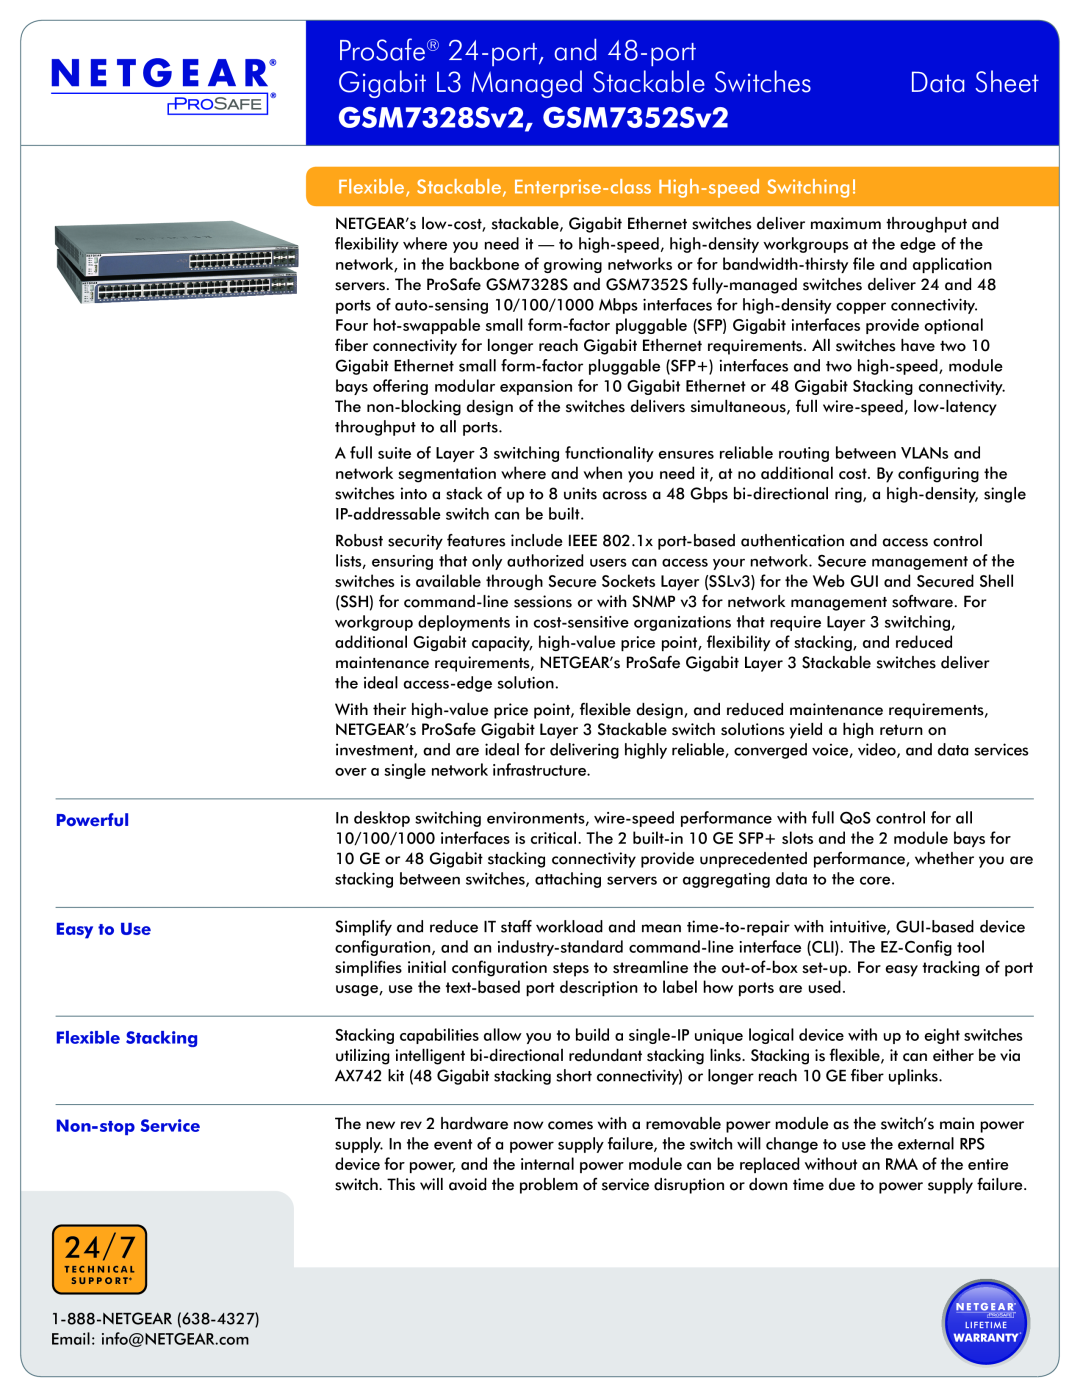 NETGEAR GSM7352Sv2 manual 24/7, ProSafe 24-port, and 48-port, Gigabit L3 Managed Stackable Switches, Data Sheet, Powerful 